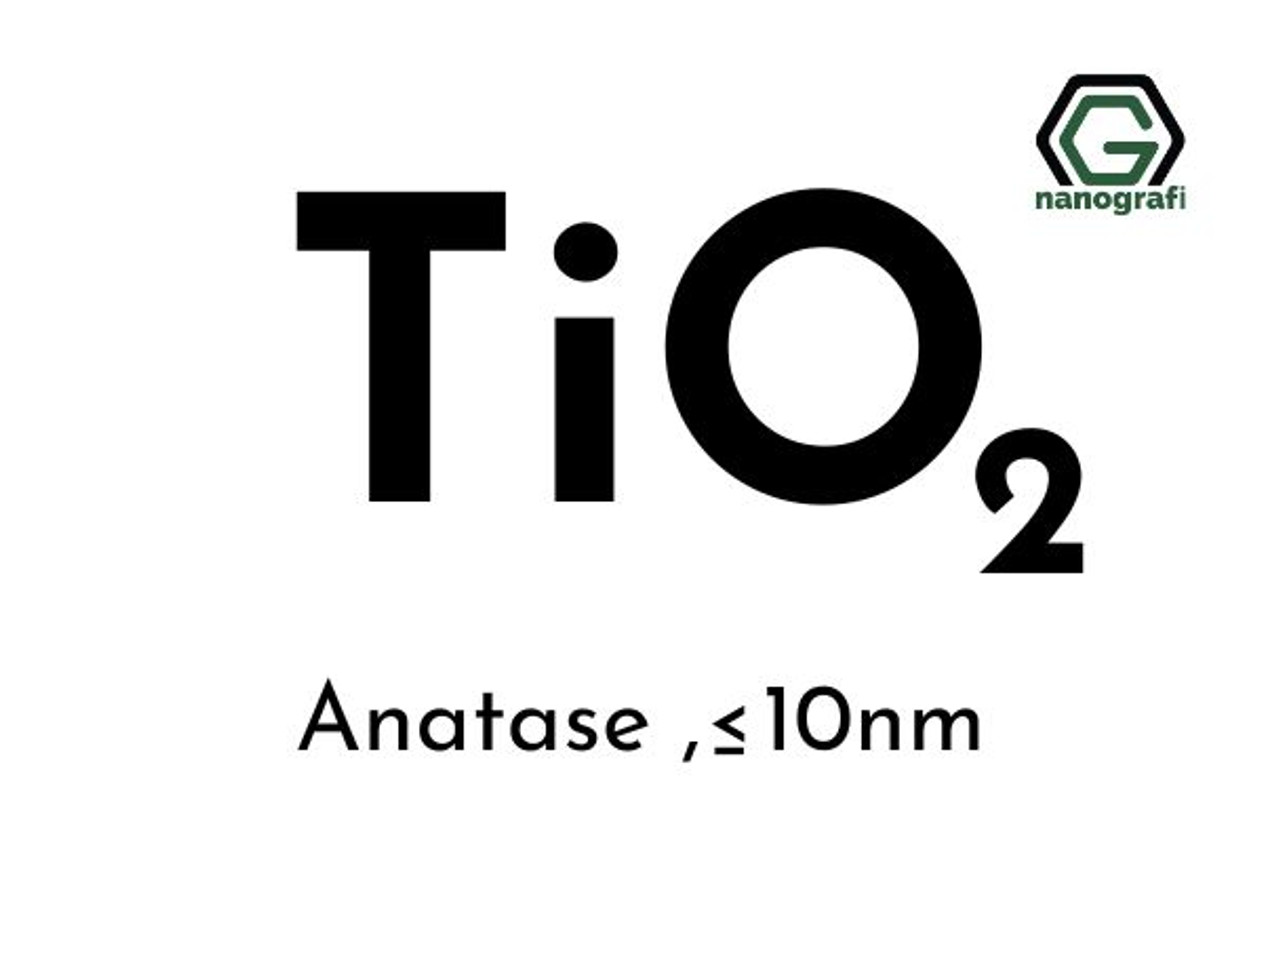 Titanium dioxide (TiO2) - Structure, Properties, and Uses